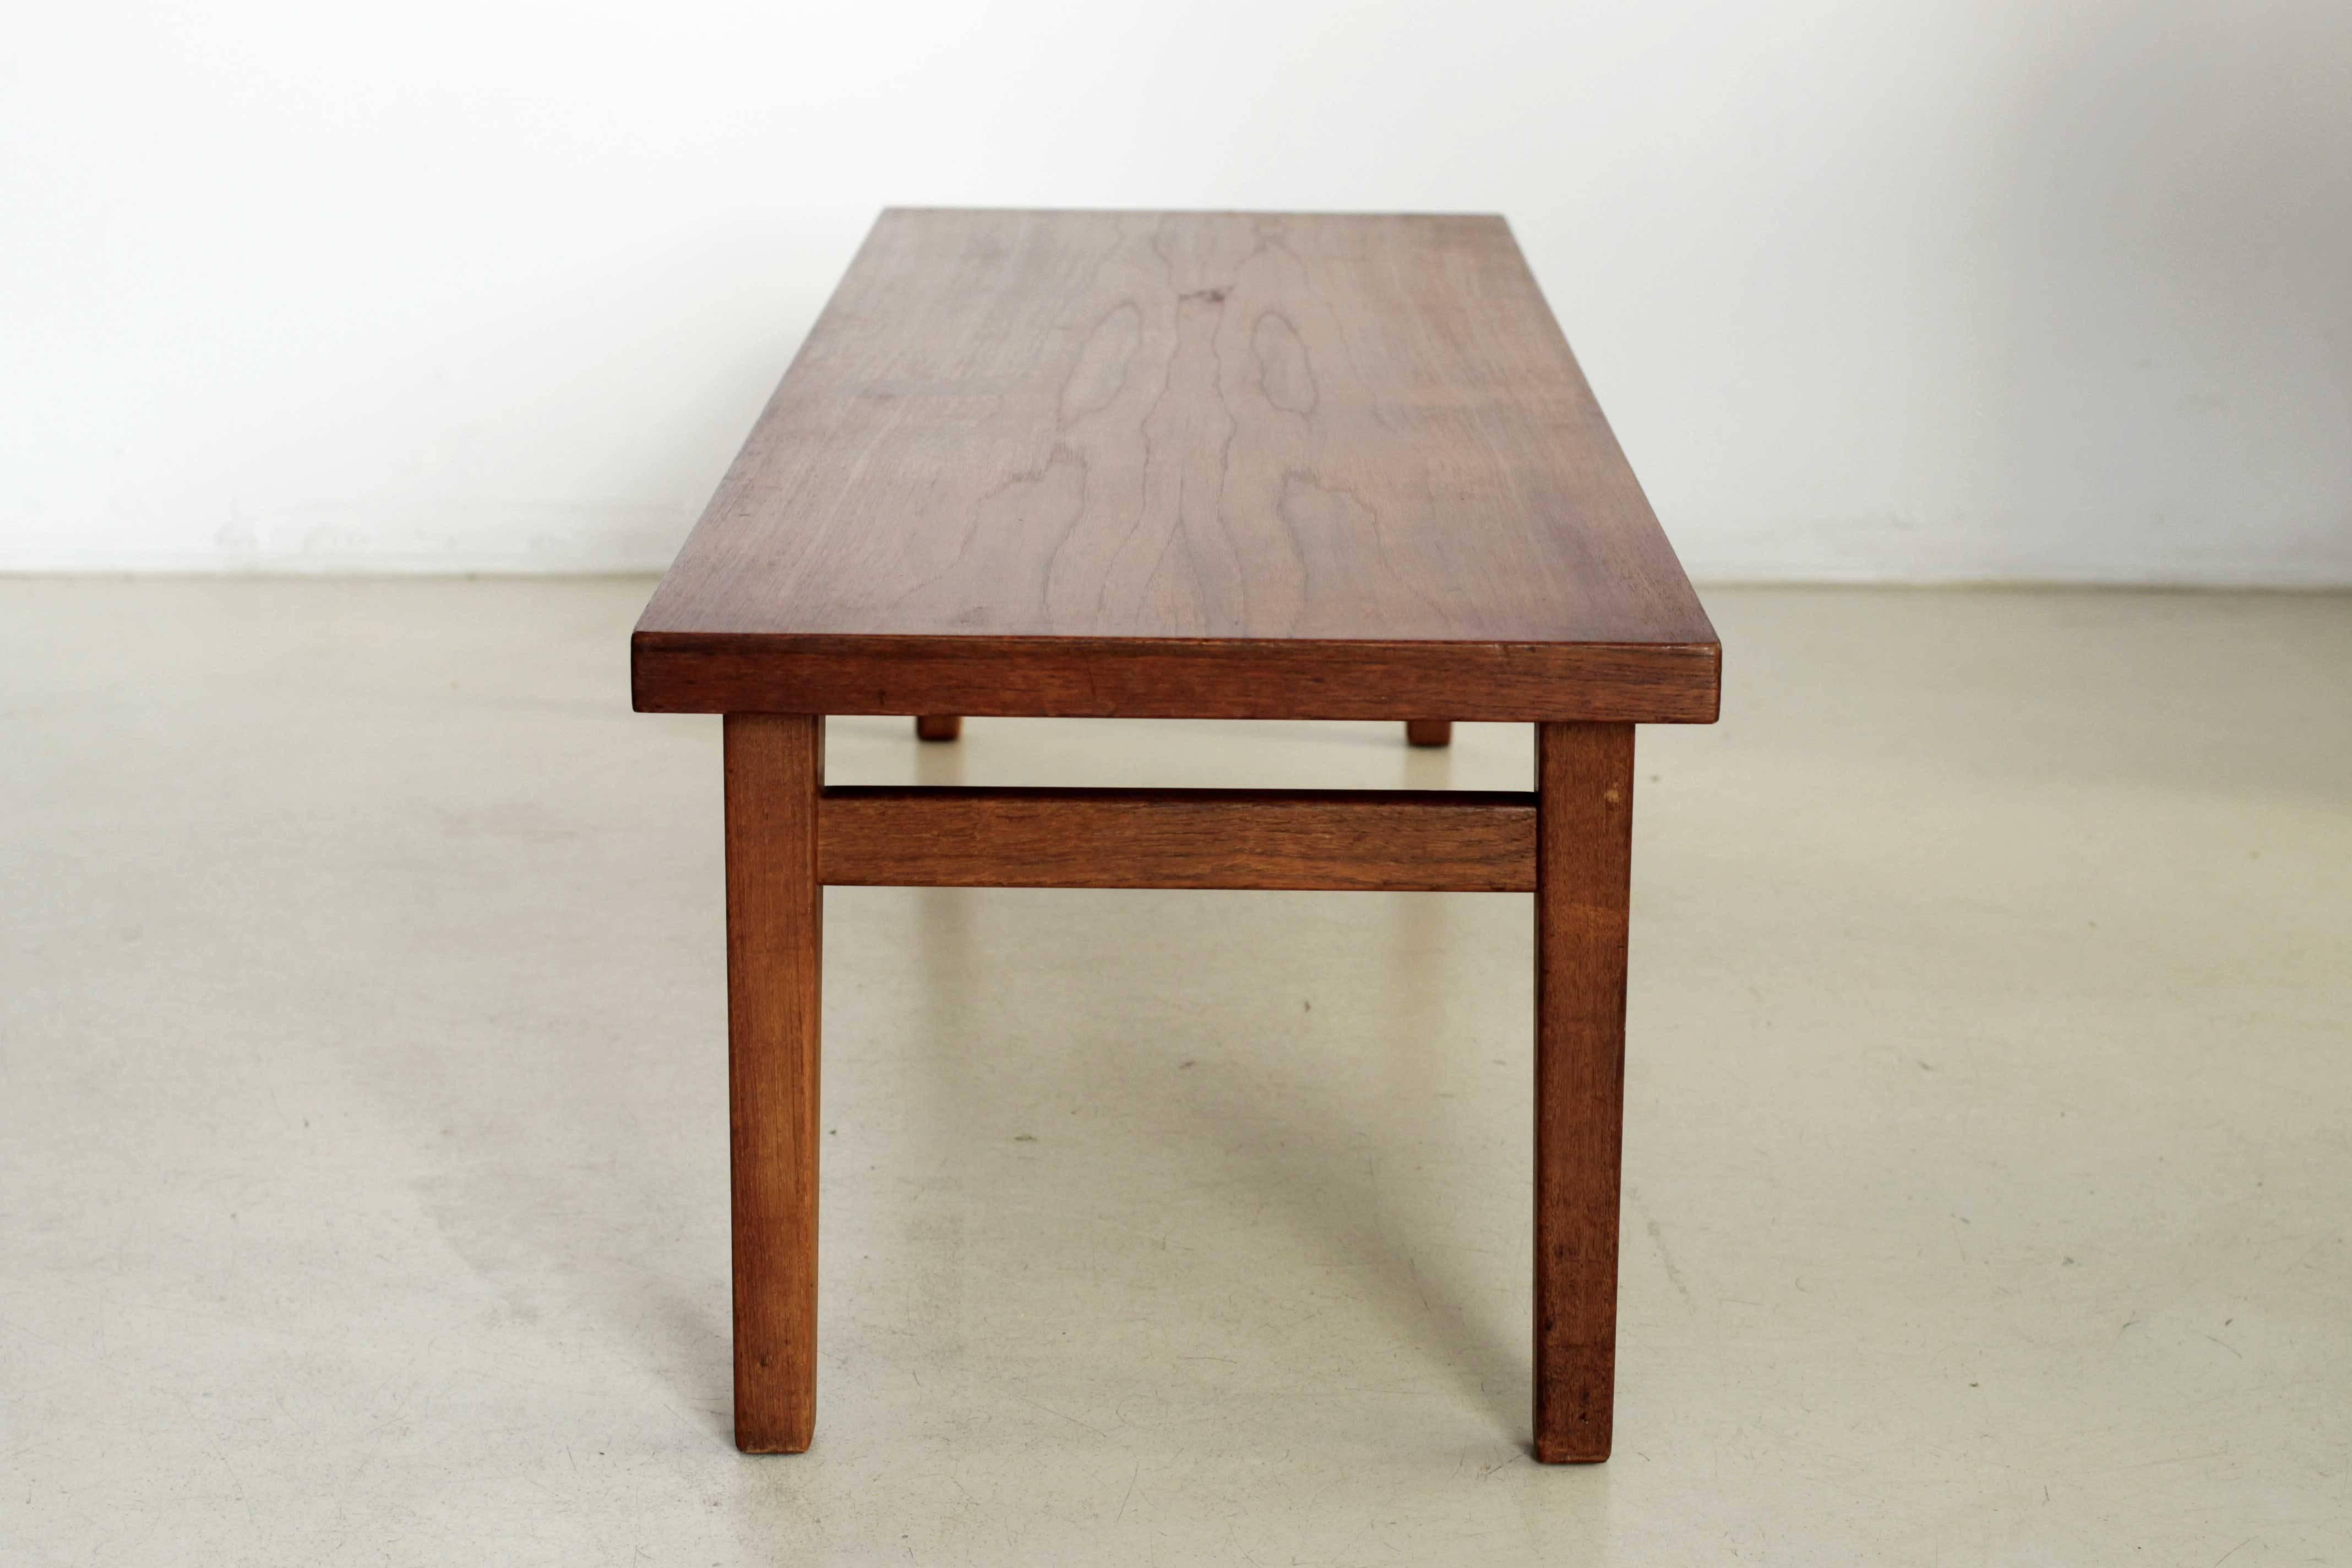 Modernist Danish Coffee Table, 1950 In Good Condition For Sale In Perpignan, FR